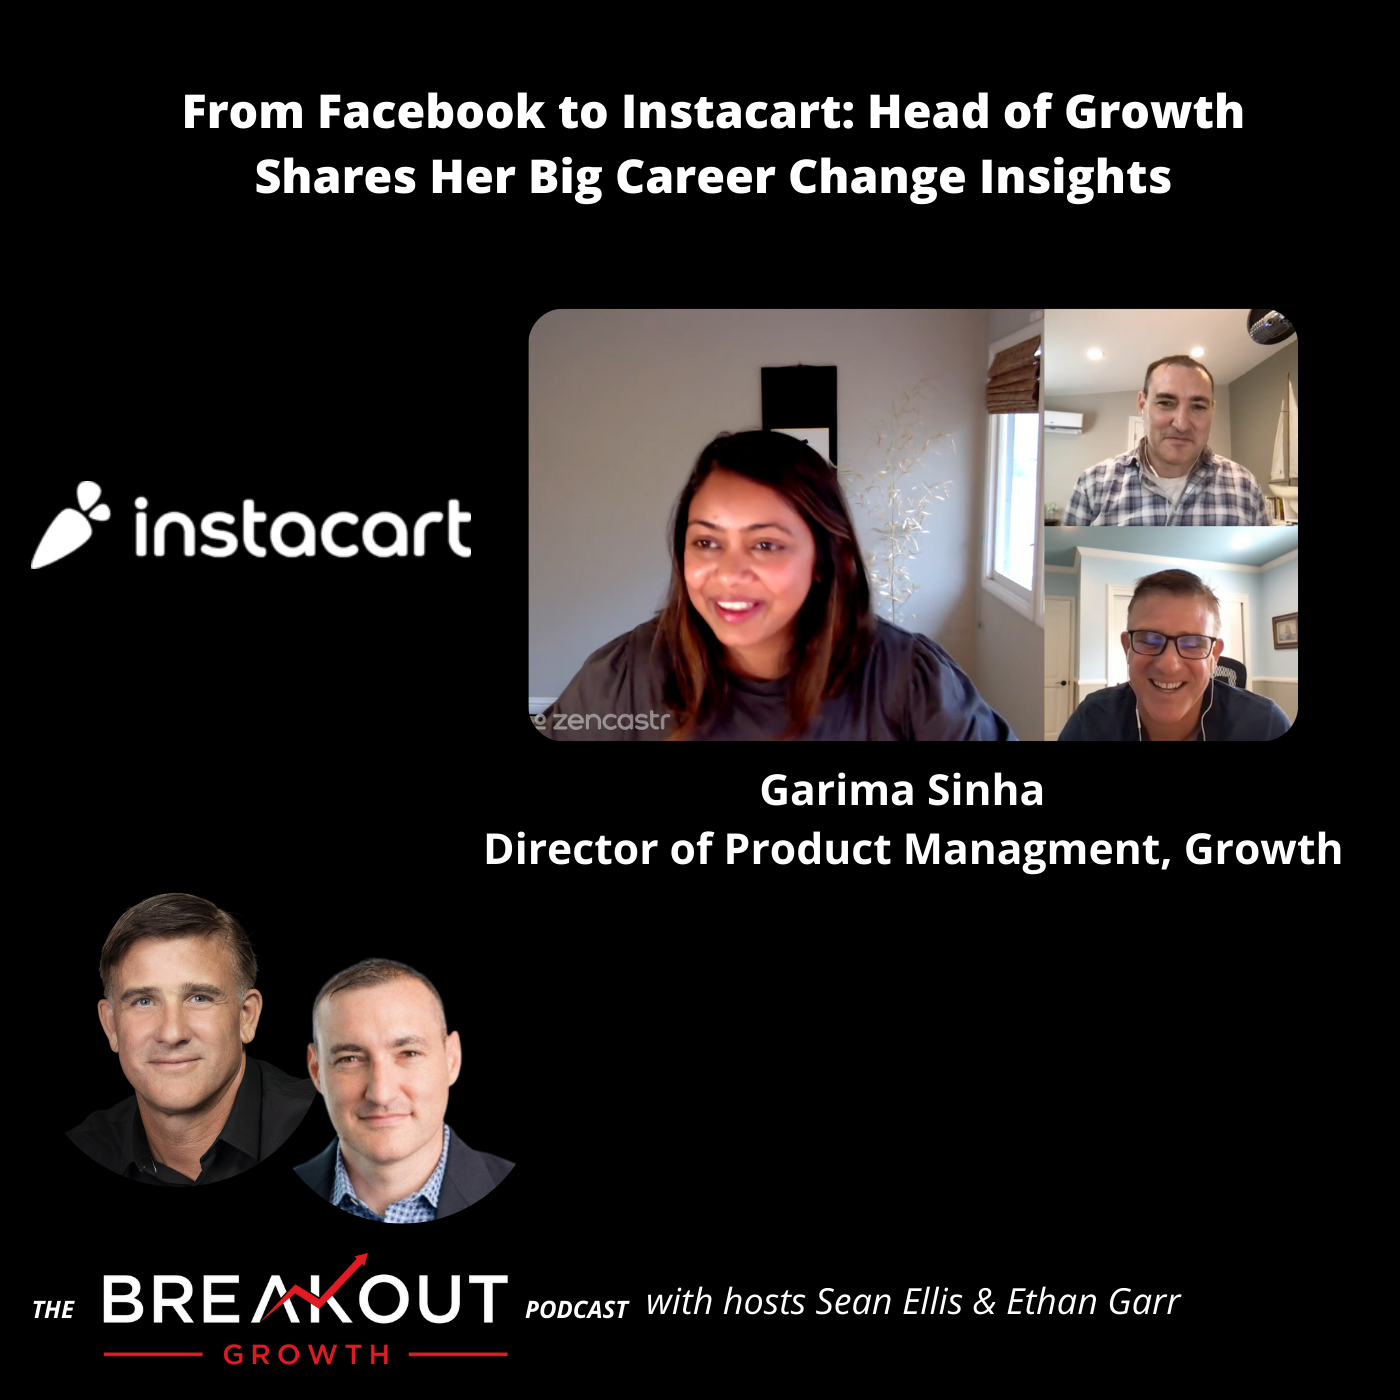 From Facebook to Instacart: Head of Growth Shares Her Big Career Change Insights